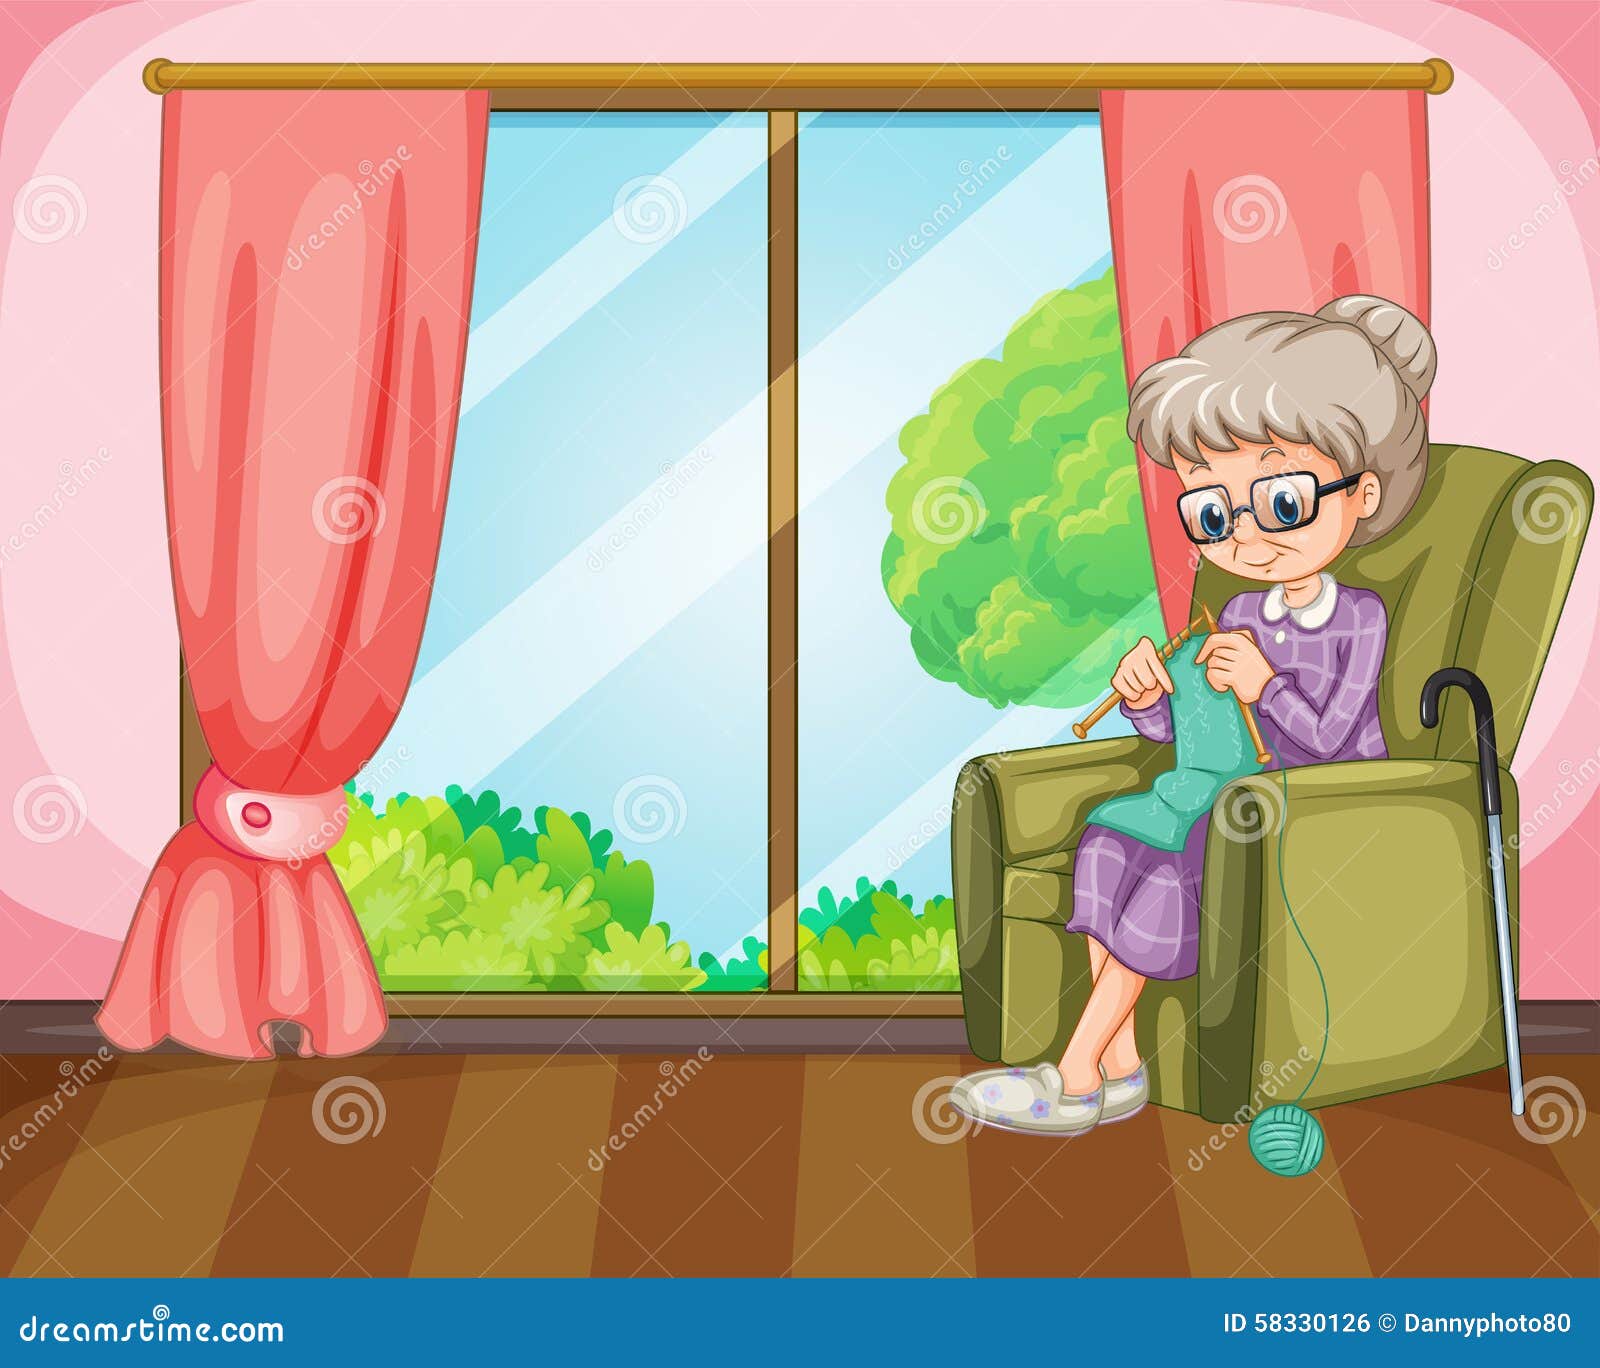 Old Lady Knitting in the Room Stock Vector - Illustration of clipart ...